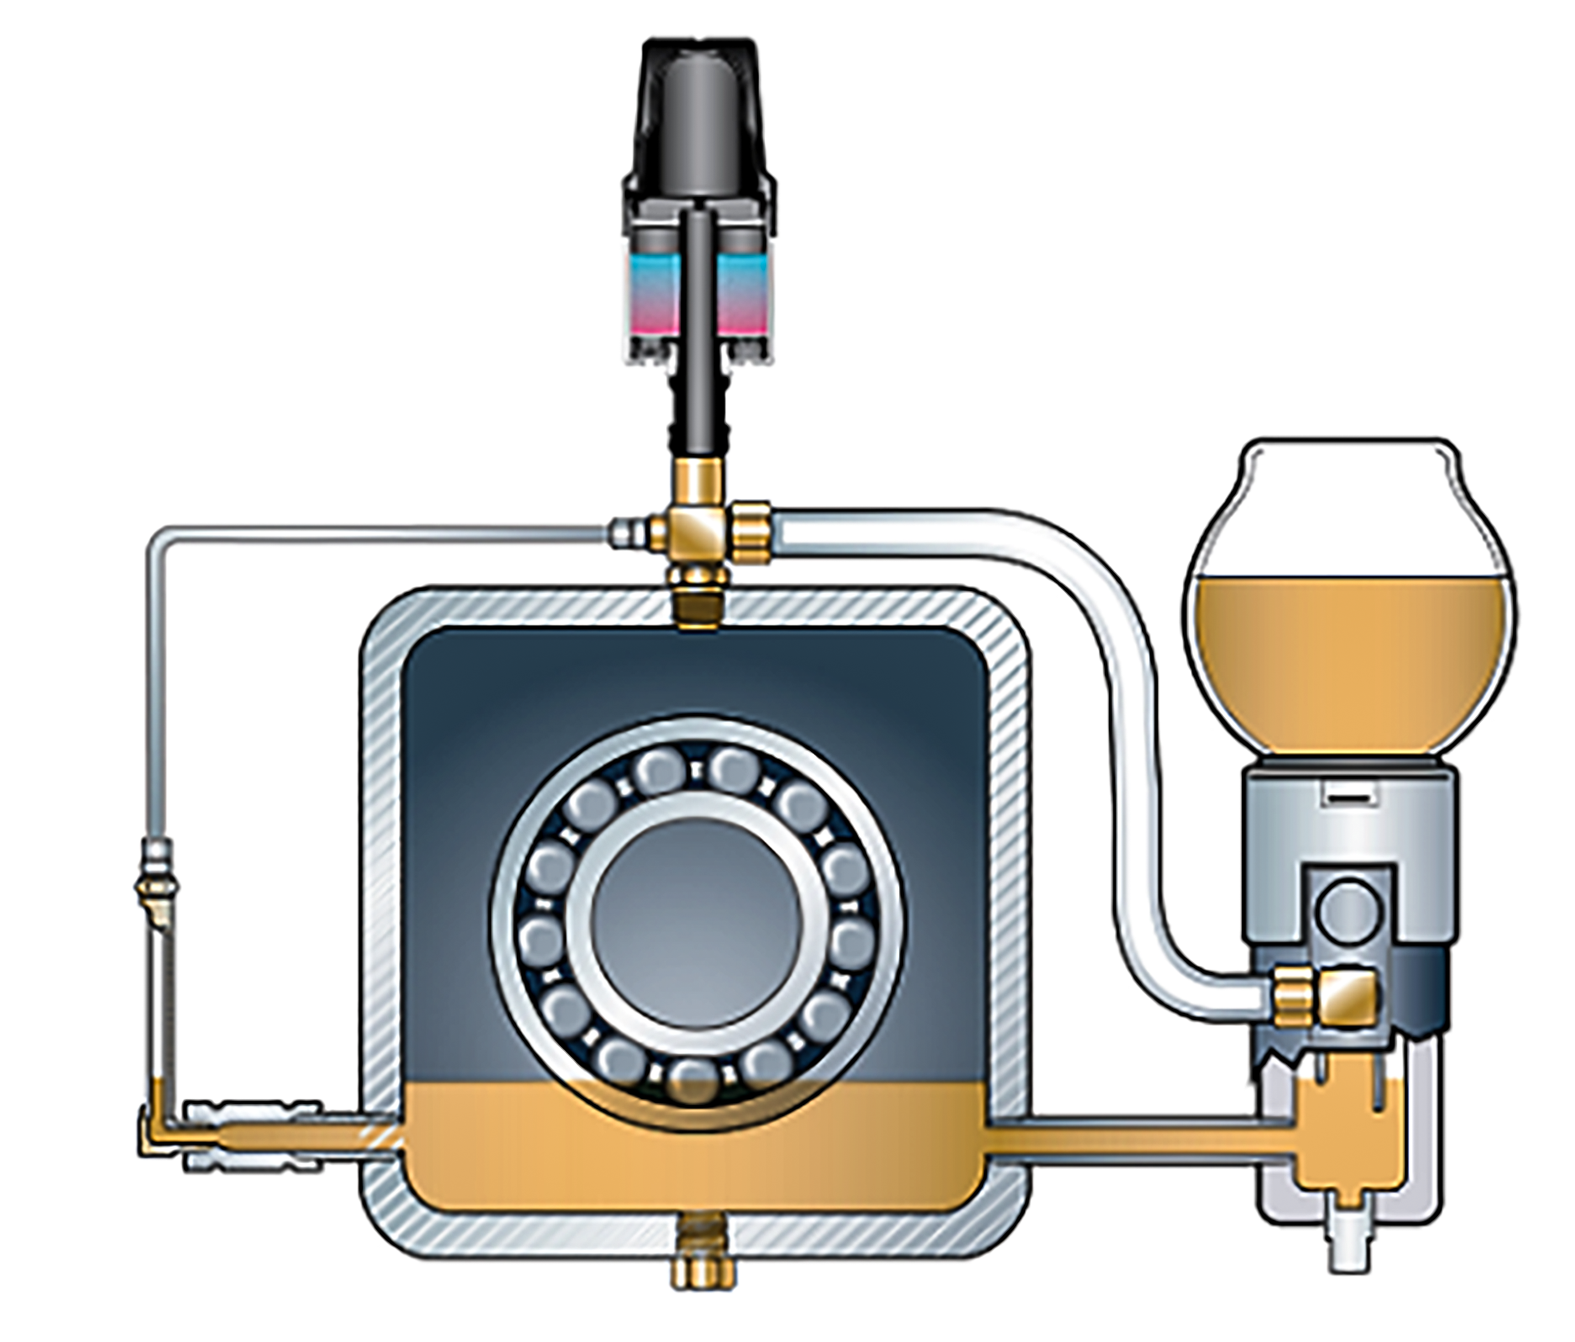 IMAGE 3: The correct oil level for a pump is halfway up the lowest rolling element.